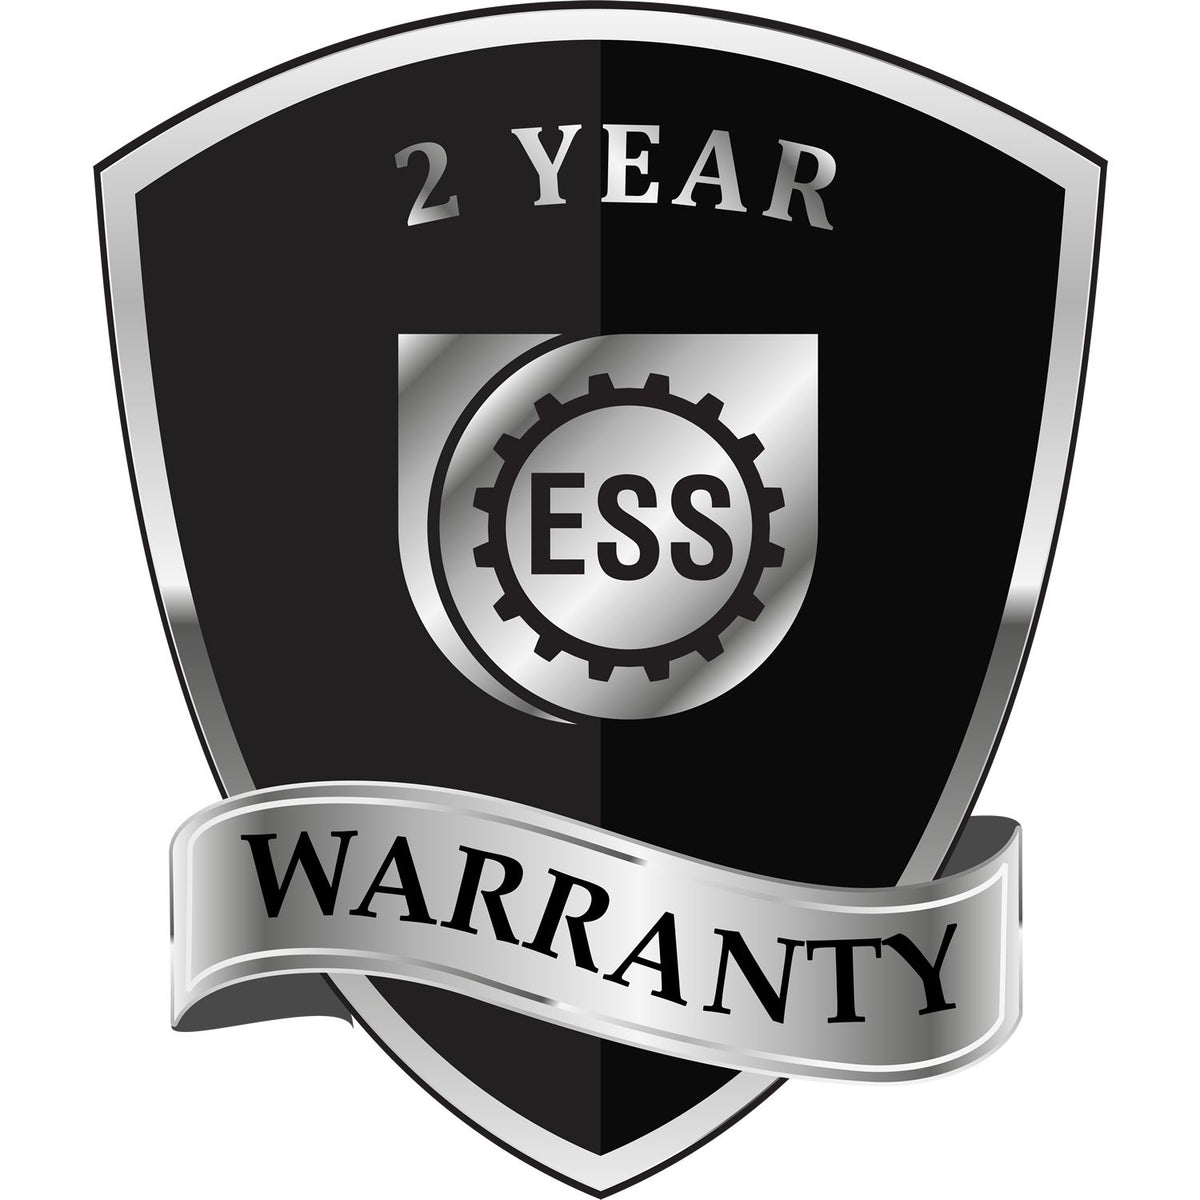 A badge or emblem showing a warranty icon for the State of Montana Extended Long Reach Engineer Seal